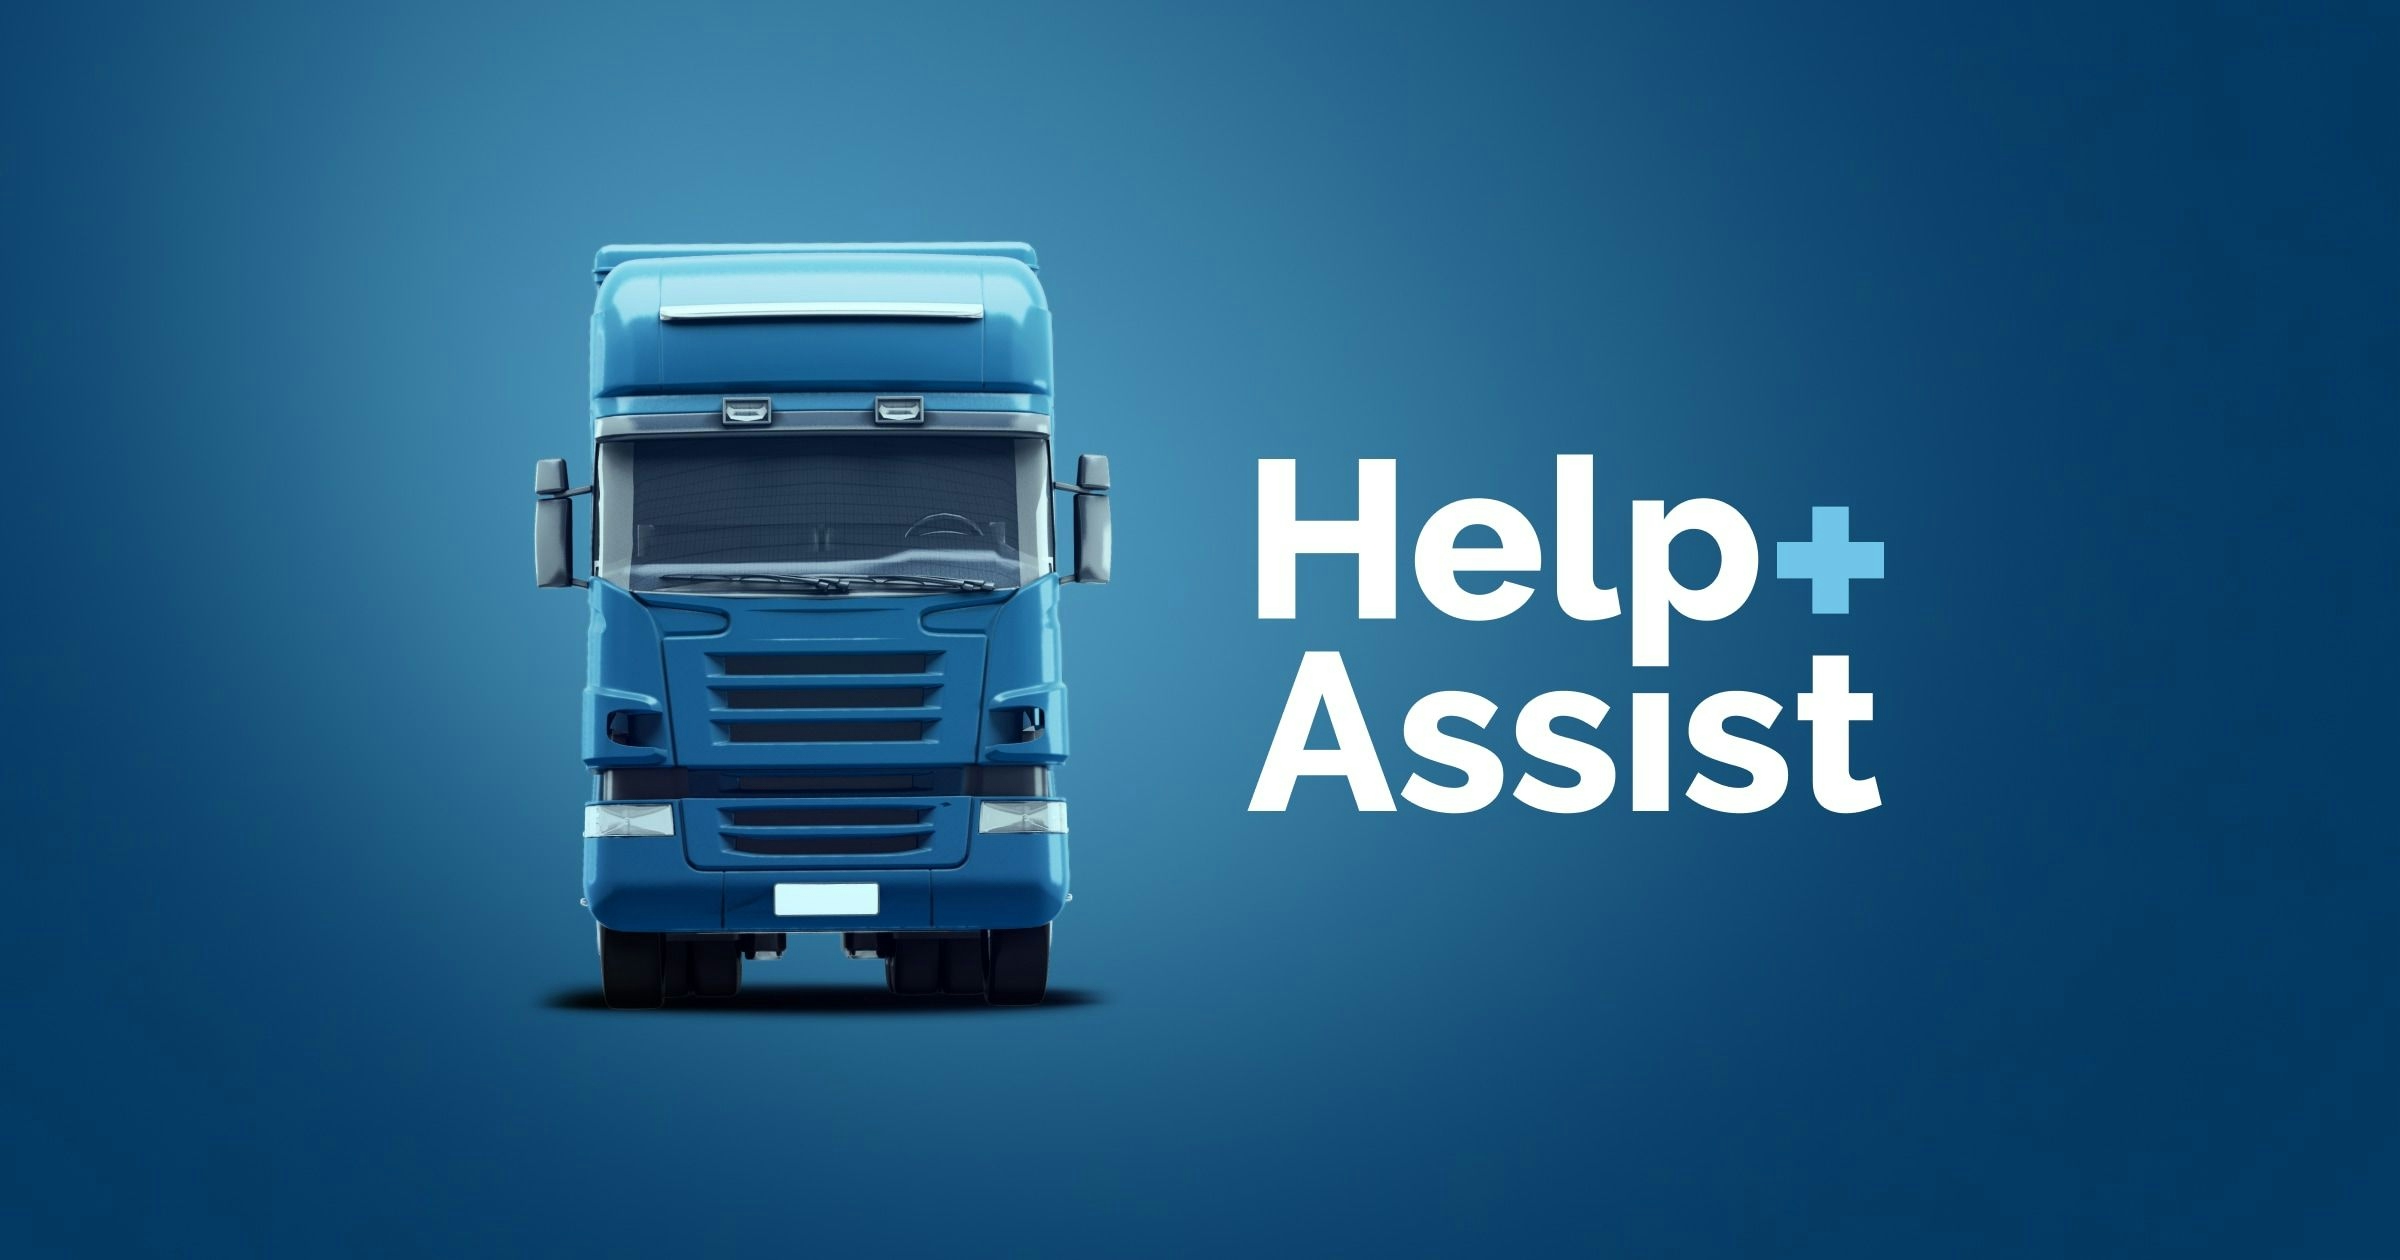 RENOMIA launches their newest app HELP+ASSIST